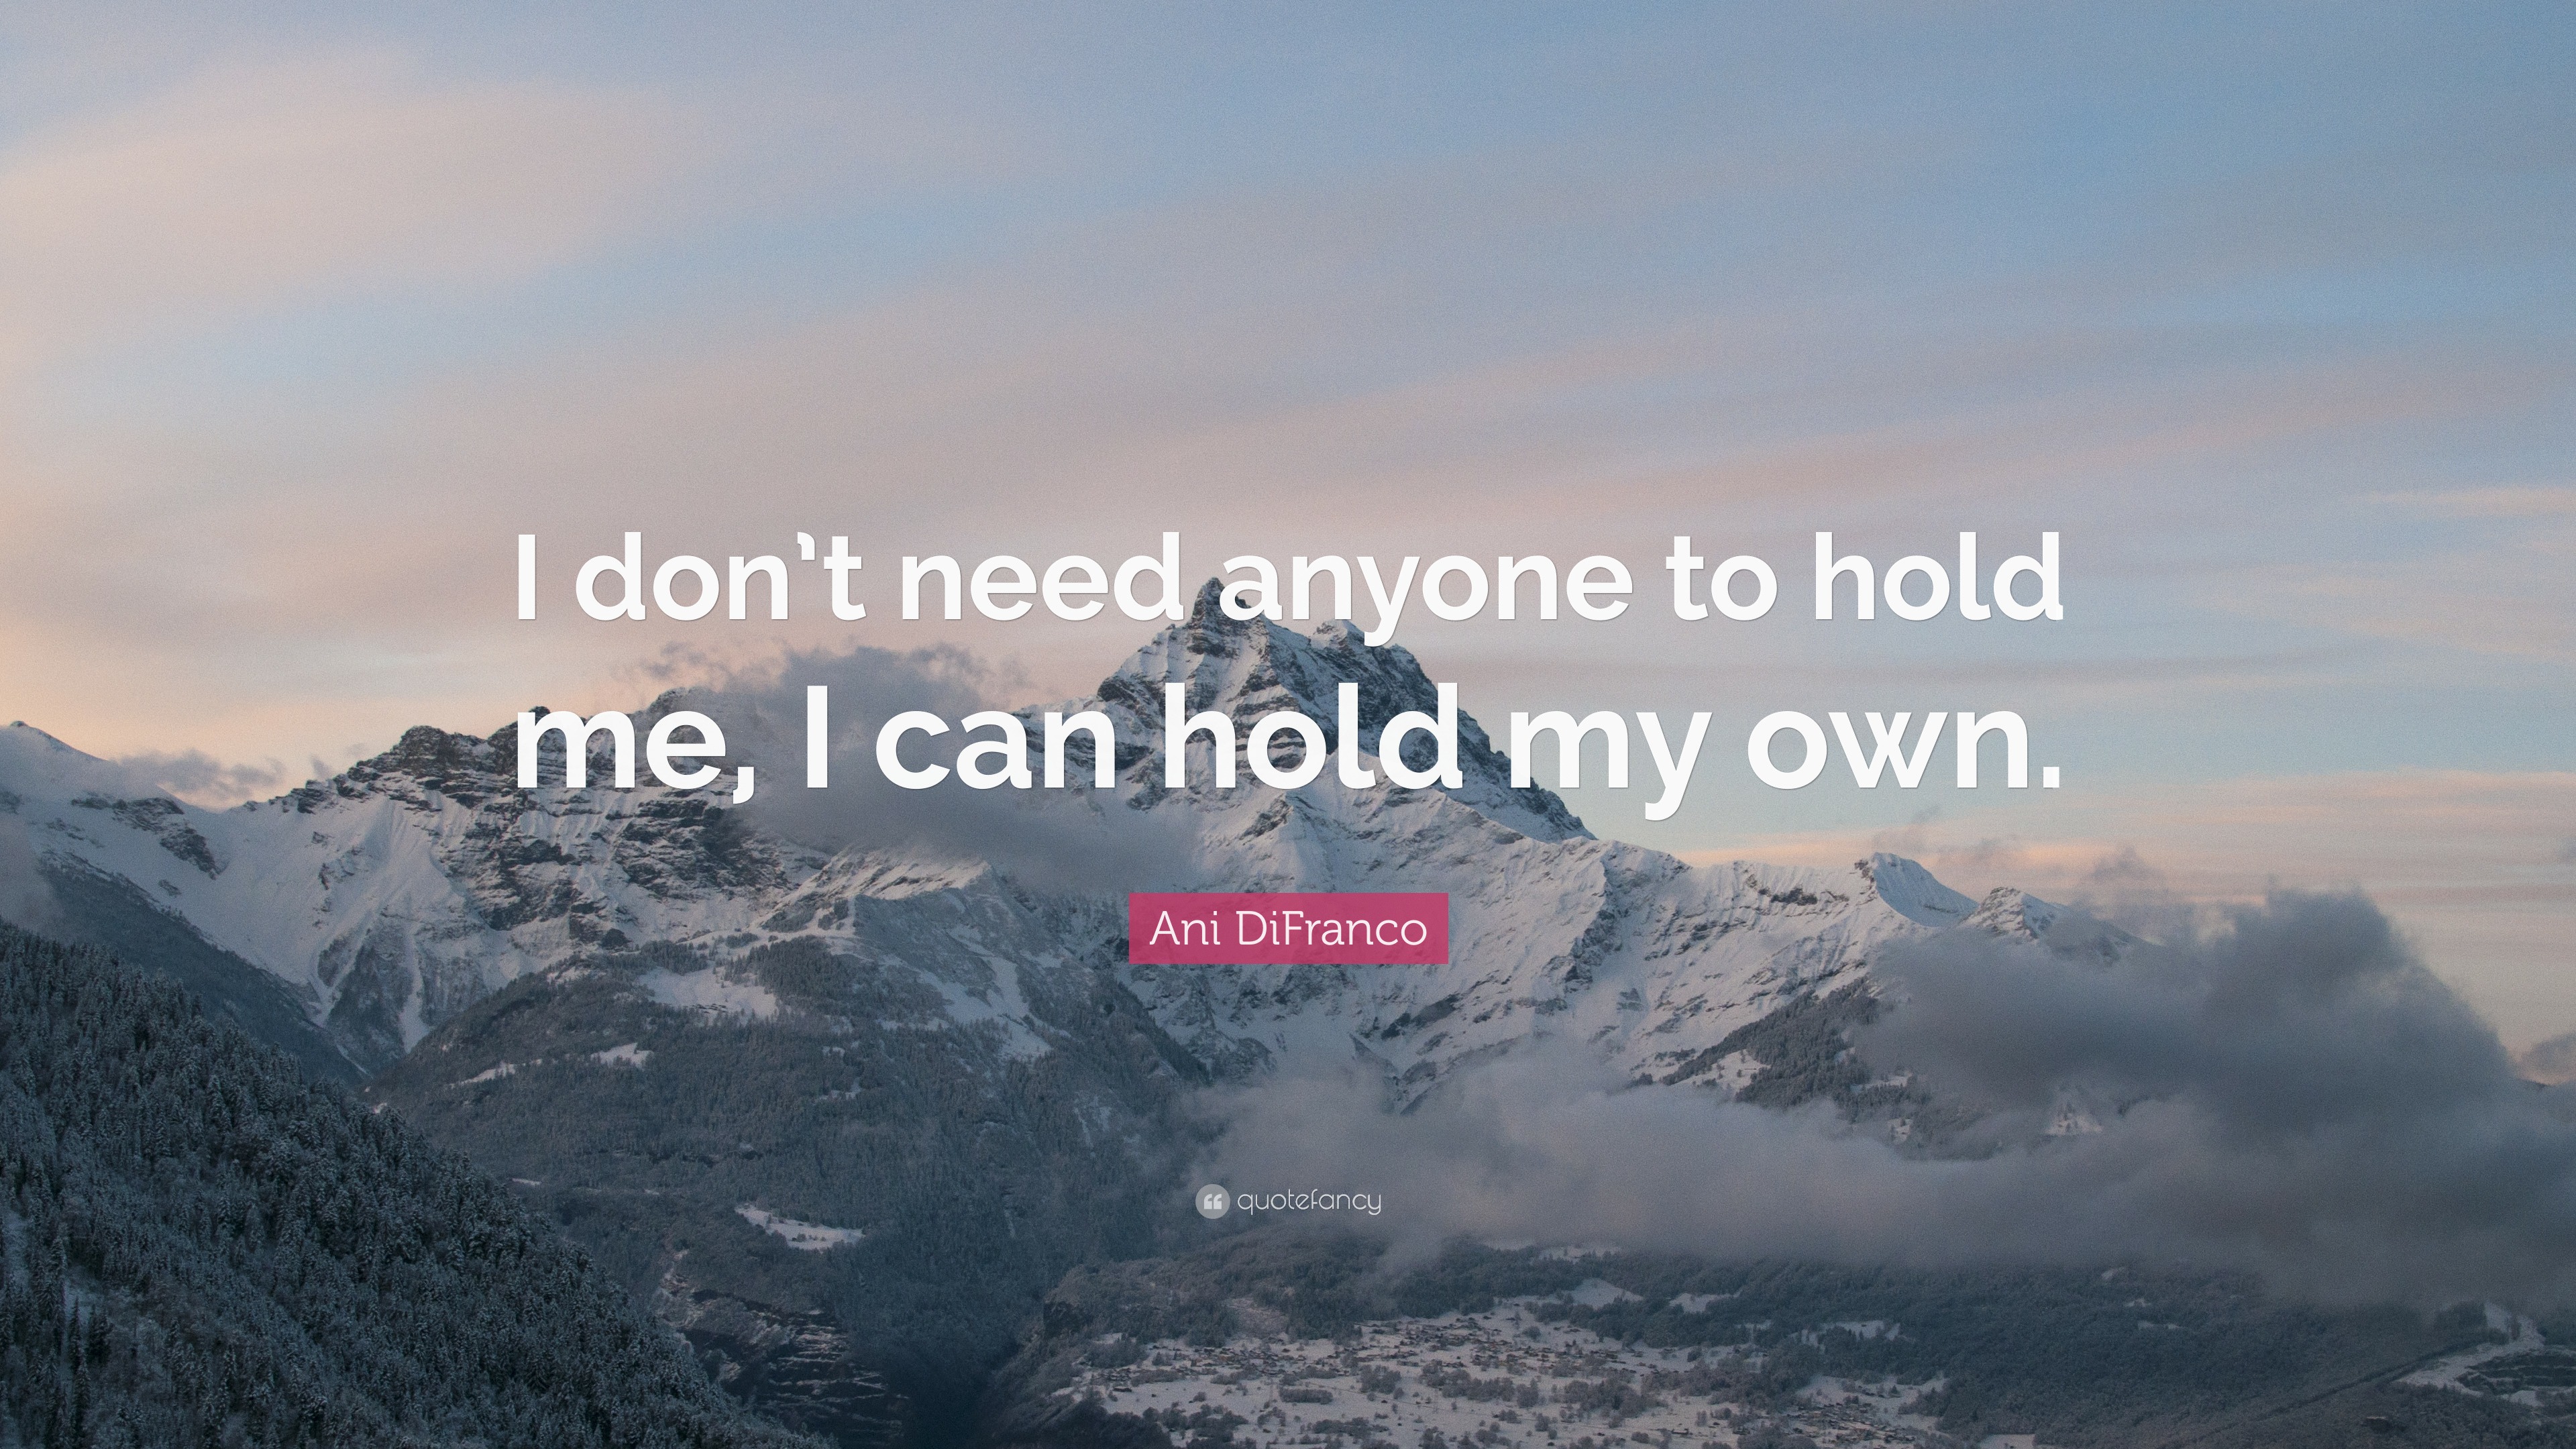 Ani DiFranco Quote: “I don't need anyone to hold me, I can hold my own.”